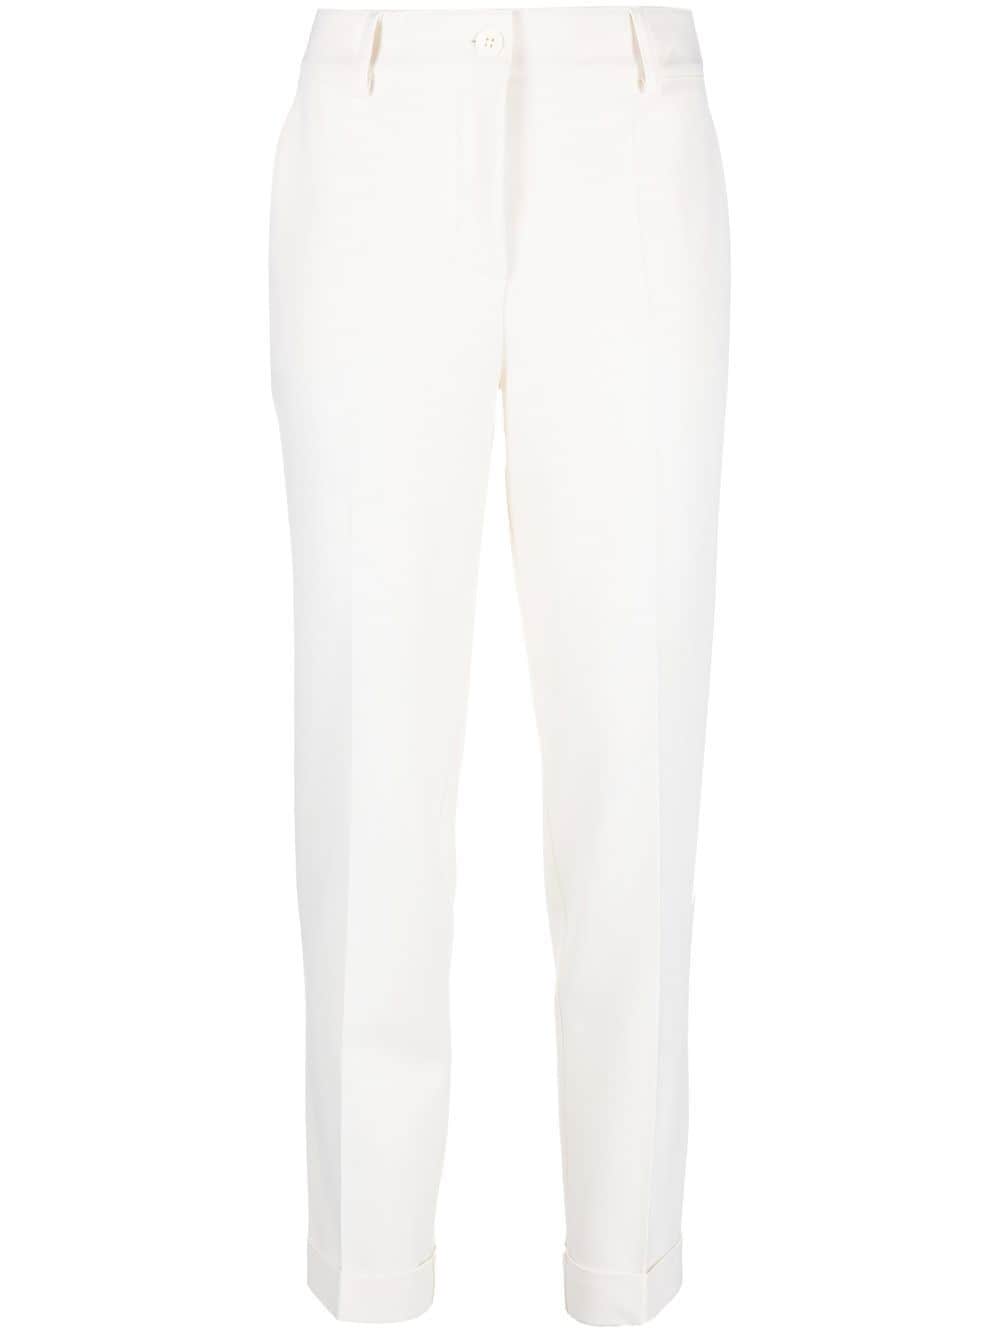 P.A.R.O.S.H. Tapered Leg Tailored Trousers - Farfetch